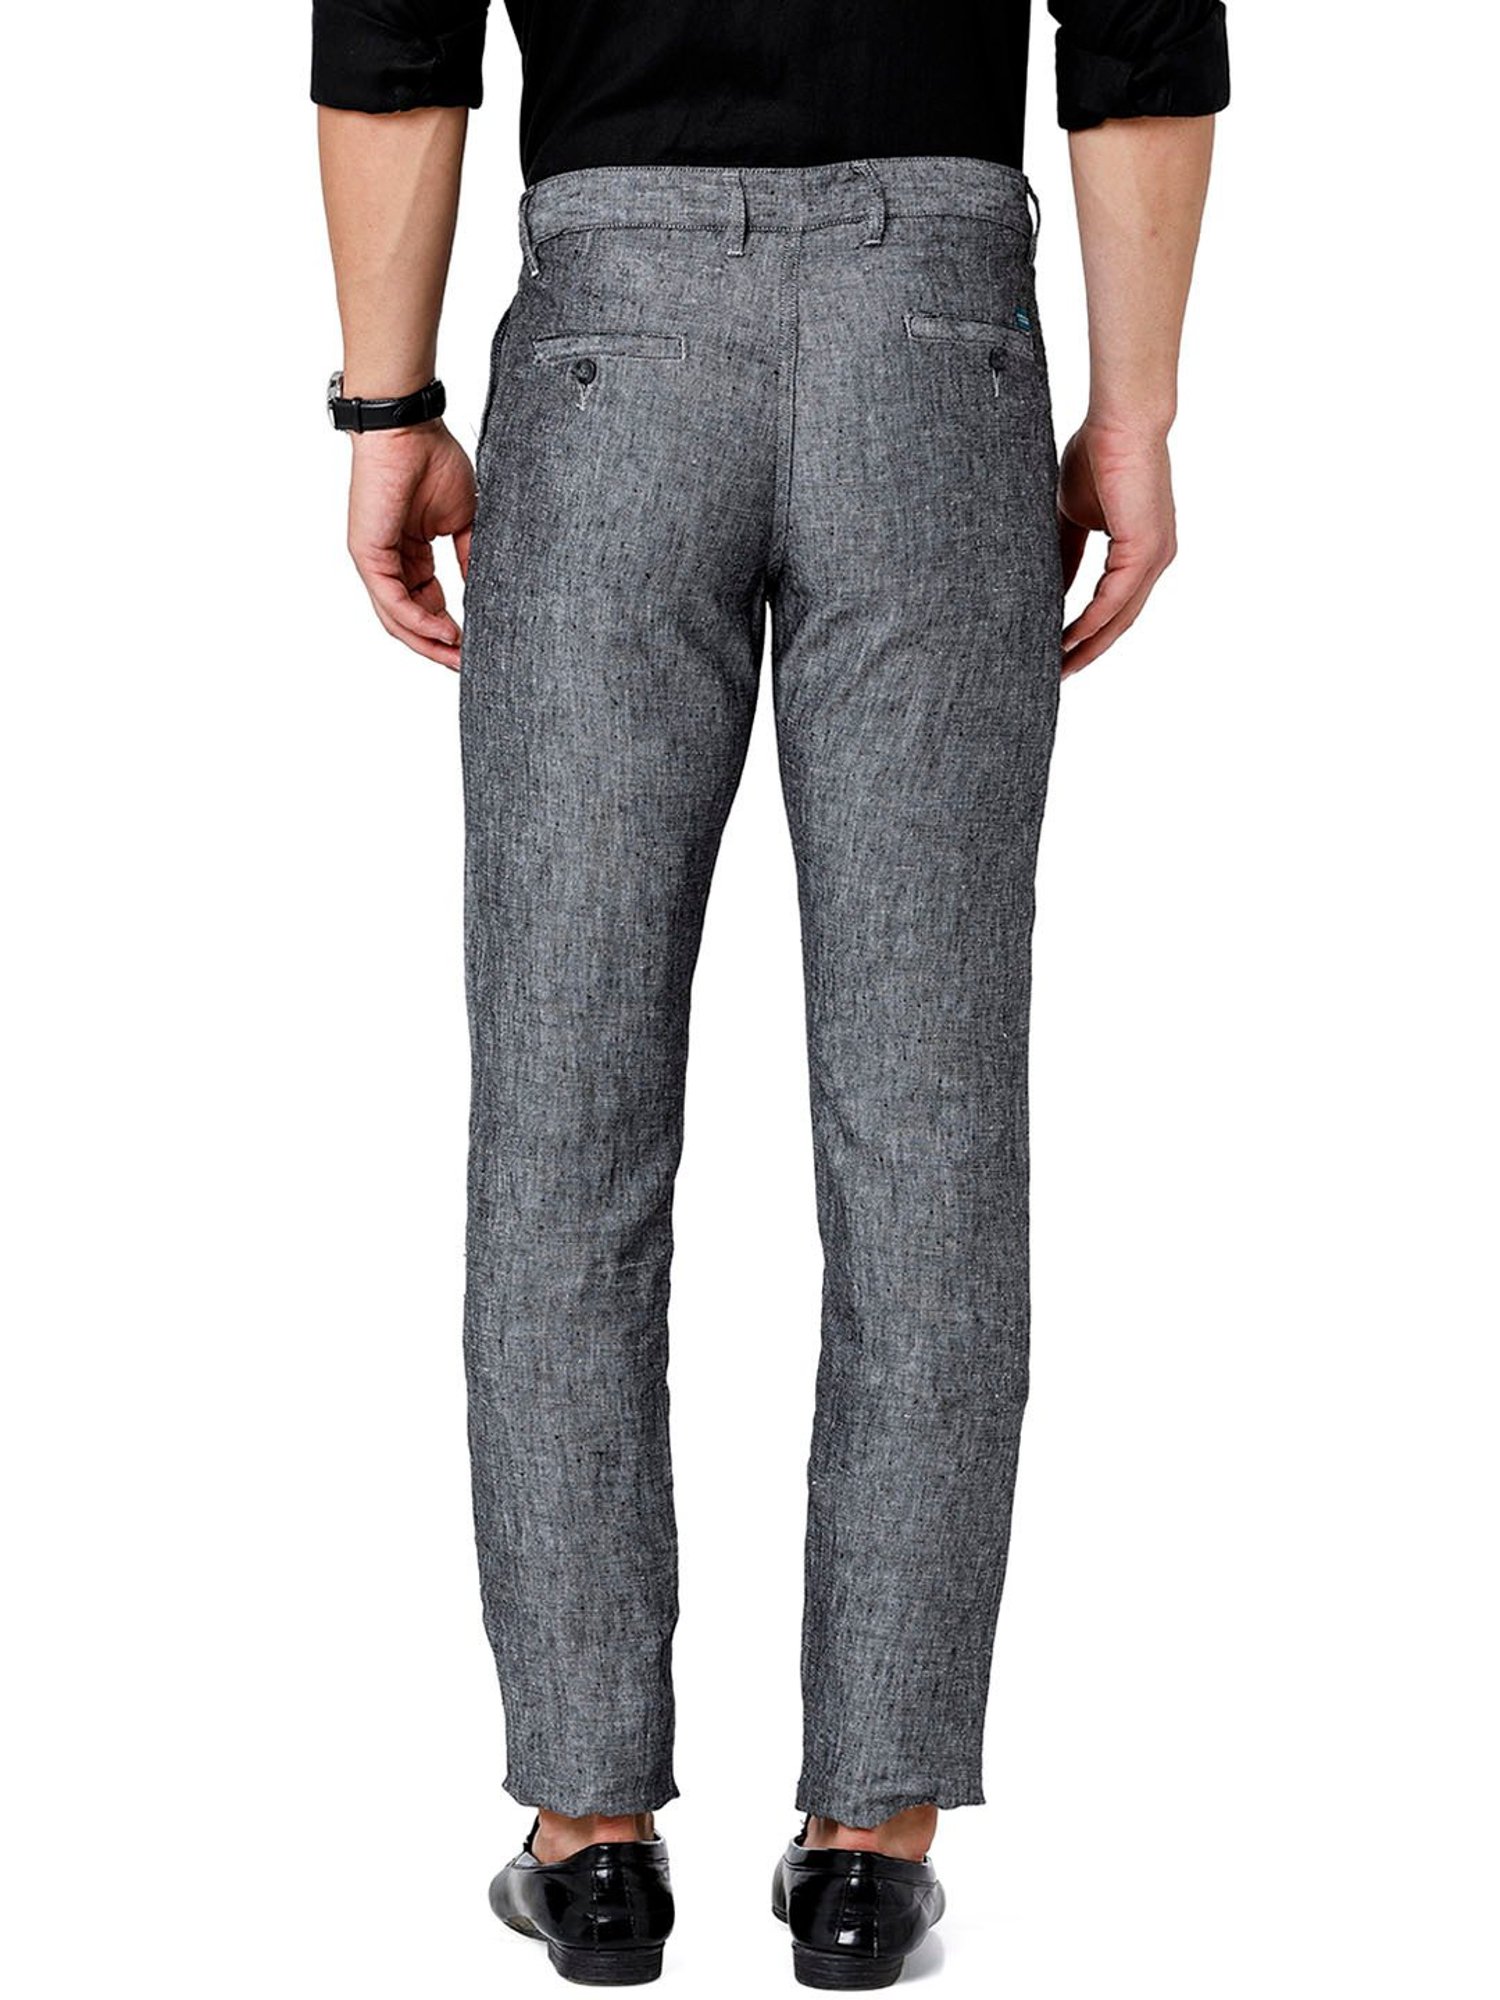 MR P SlimFit Grey Worsted Wool Trousers for Men  MR PORTER